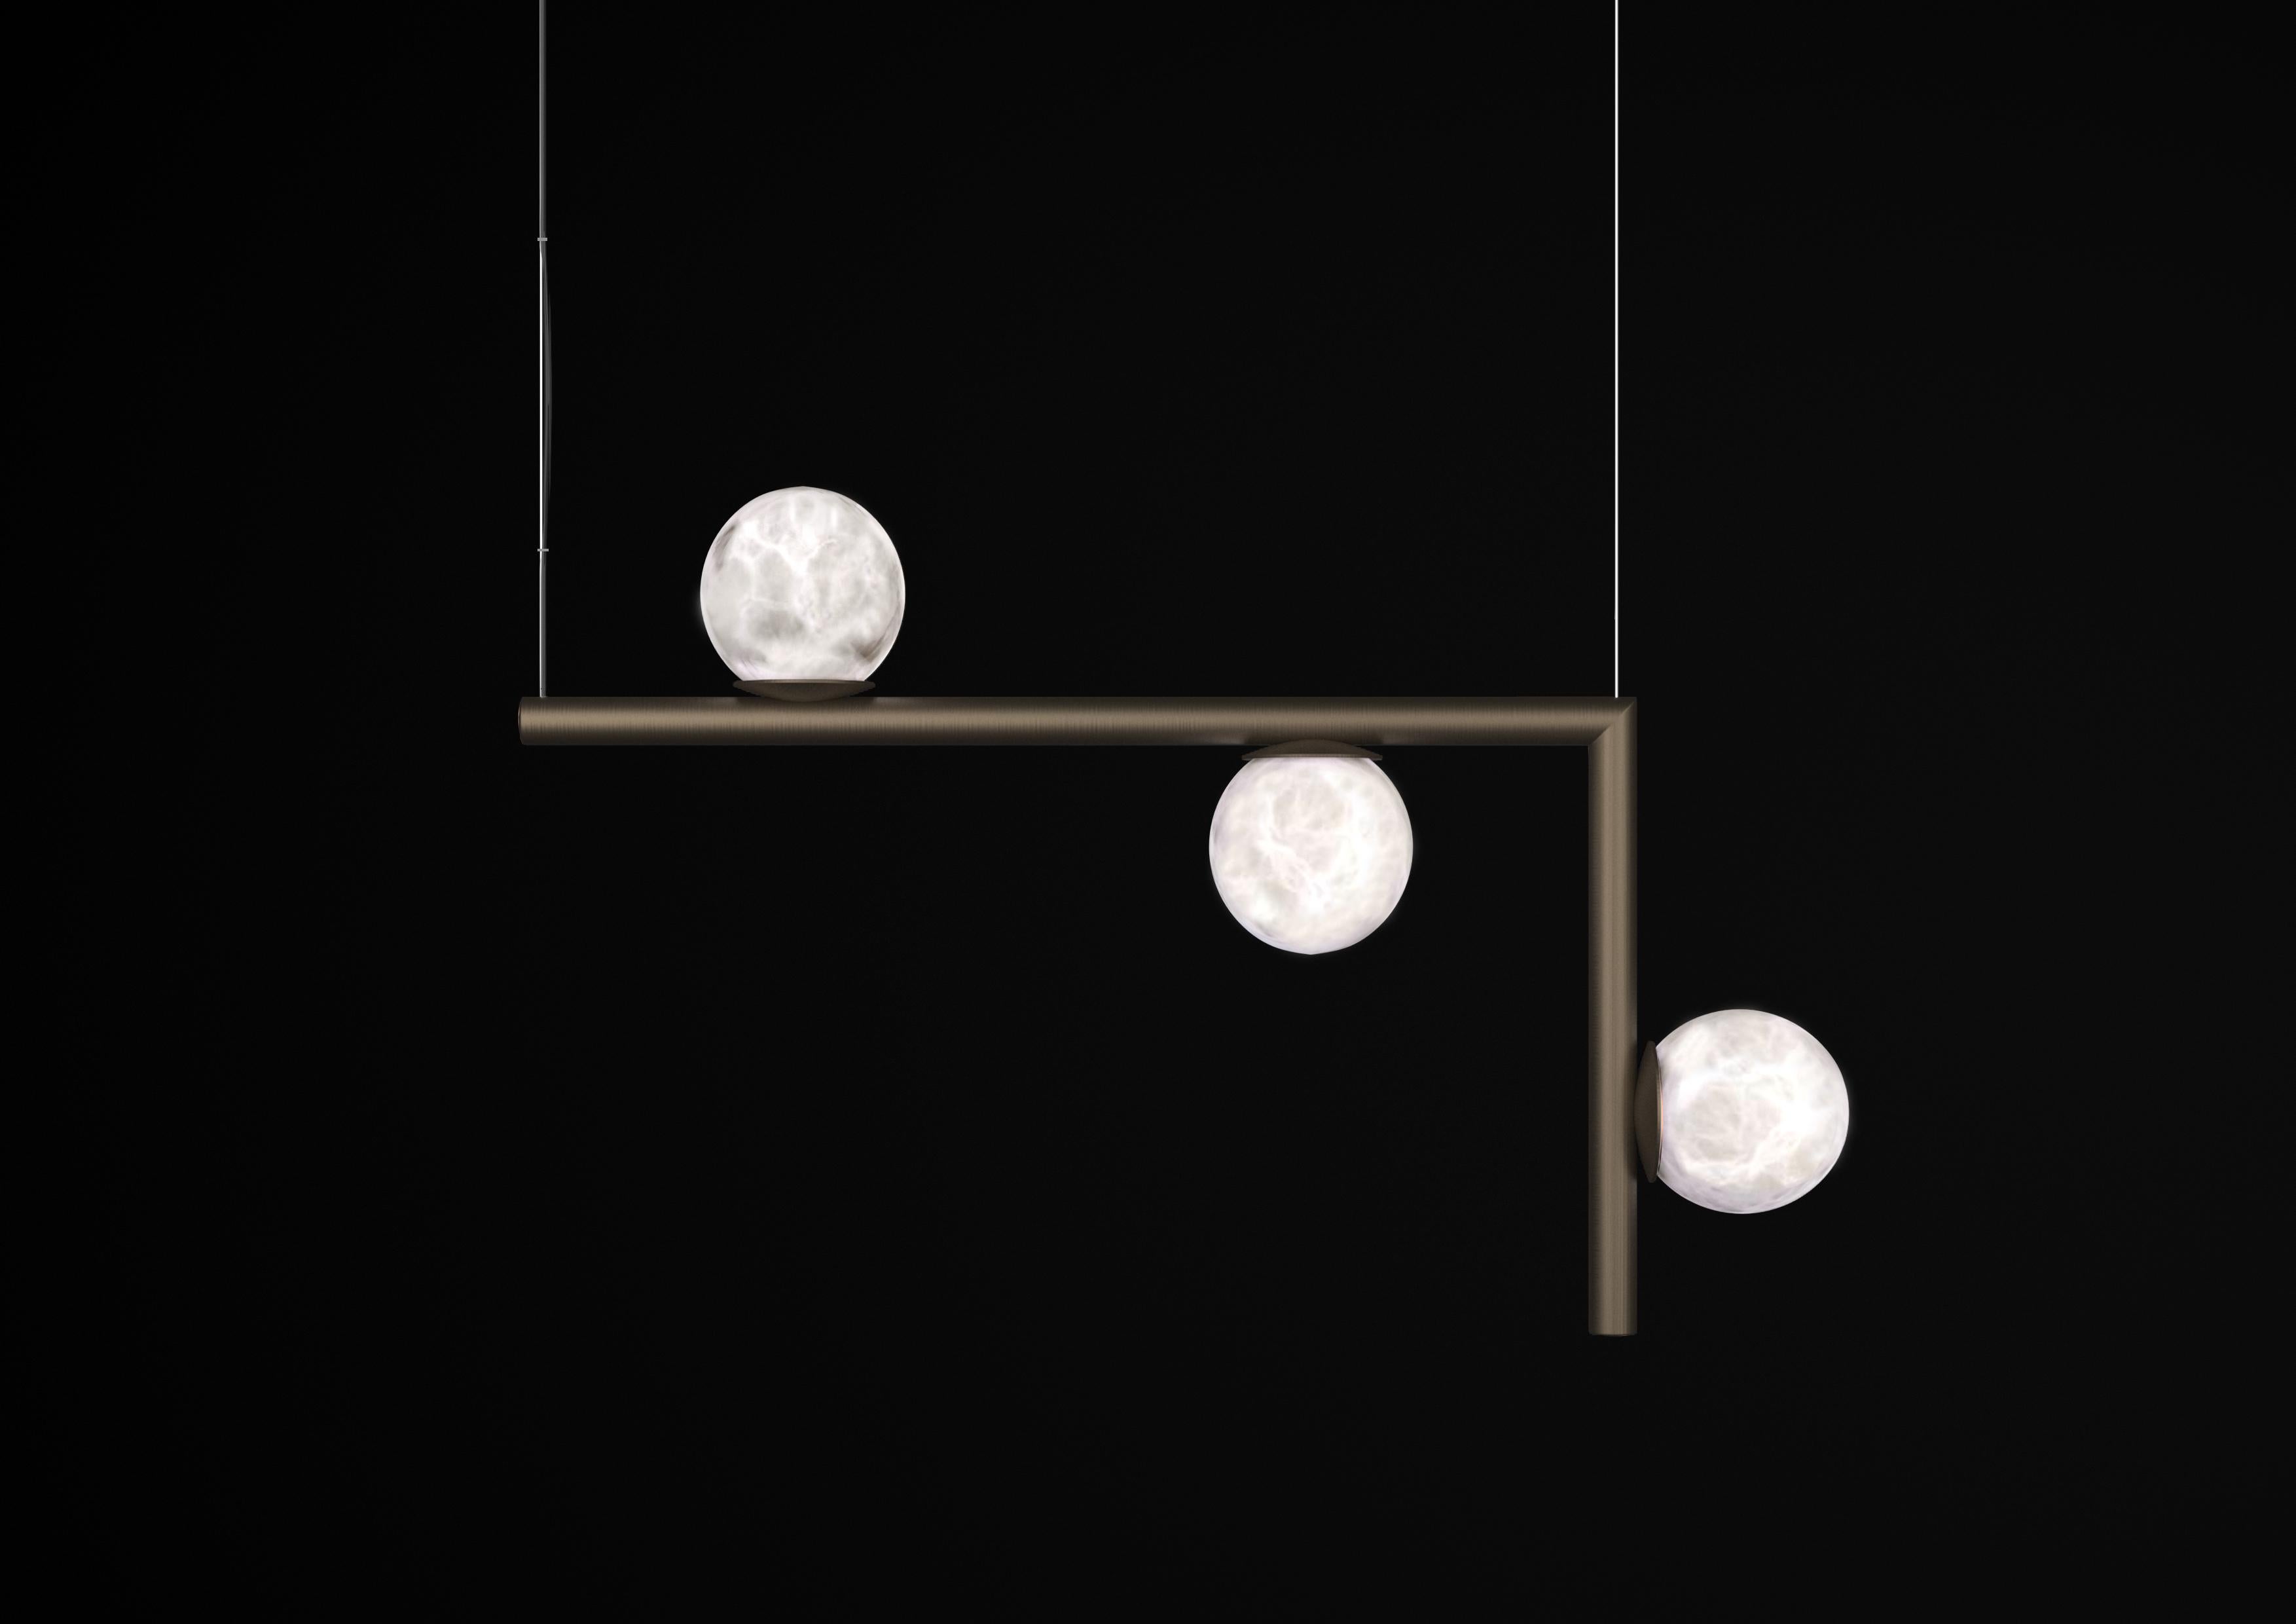 Ofione 2 Brushed Burnished Metal Pendant Lamp by Alabastro Italiano
Dimensions: D 14 x W 85 x H 55 cm.
Materials: White alabaster and metal.

Available in different finishes: Shiny Silver, Bronze, Brushed Brass, Ruggine of Florence, Brushed